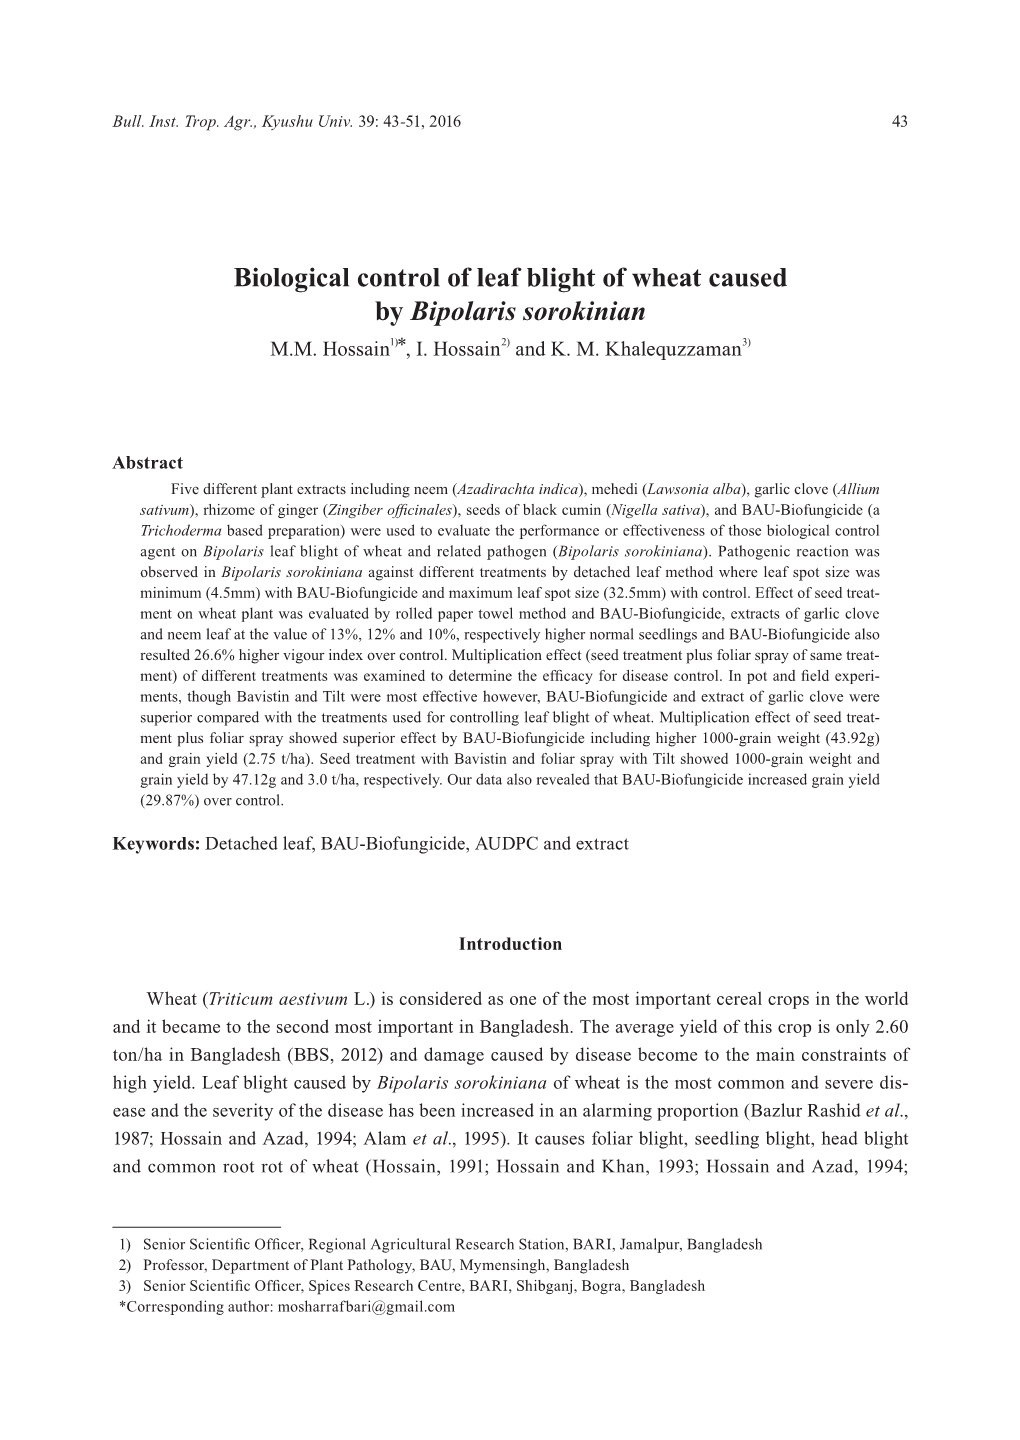 Biological Control of Leaf Blight of Wheat Caused by Bipolaris Sorokinian M.M